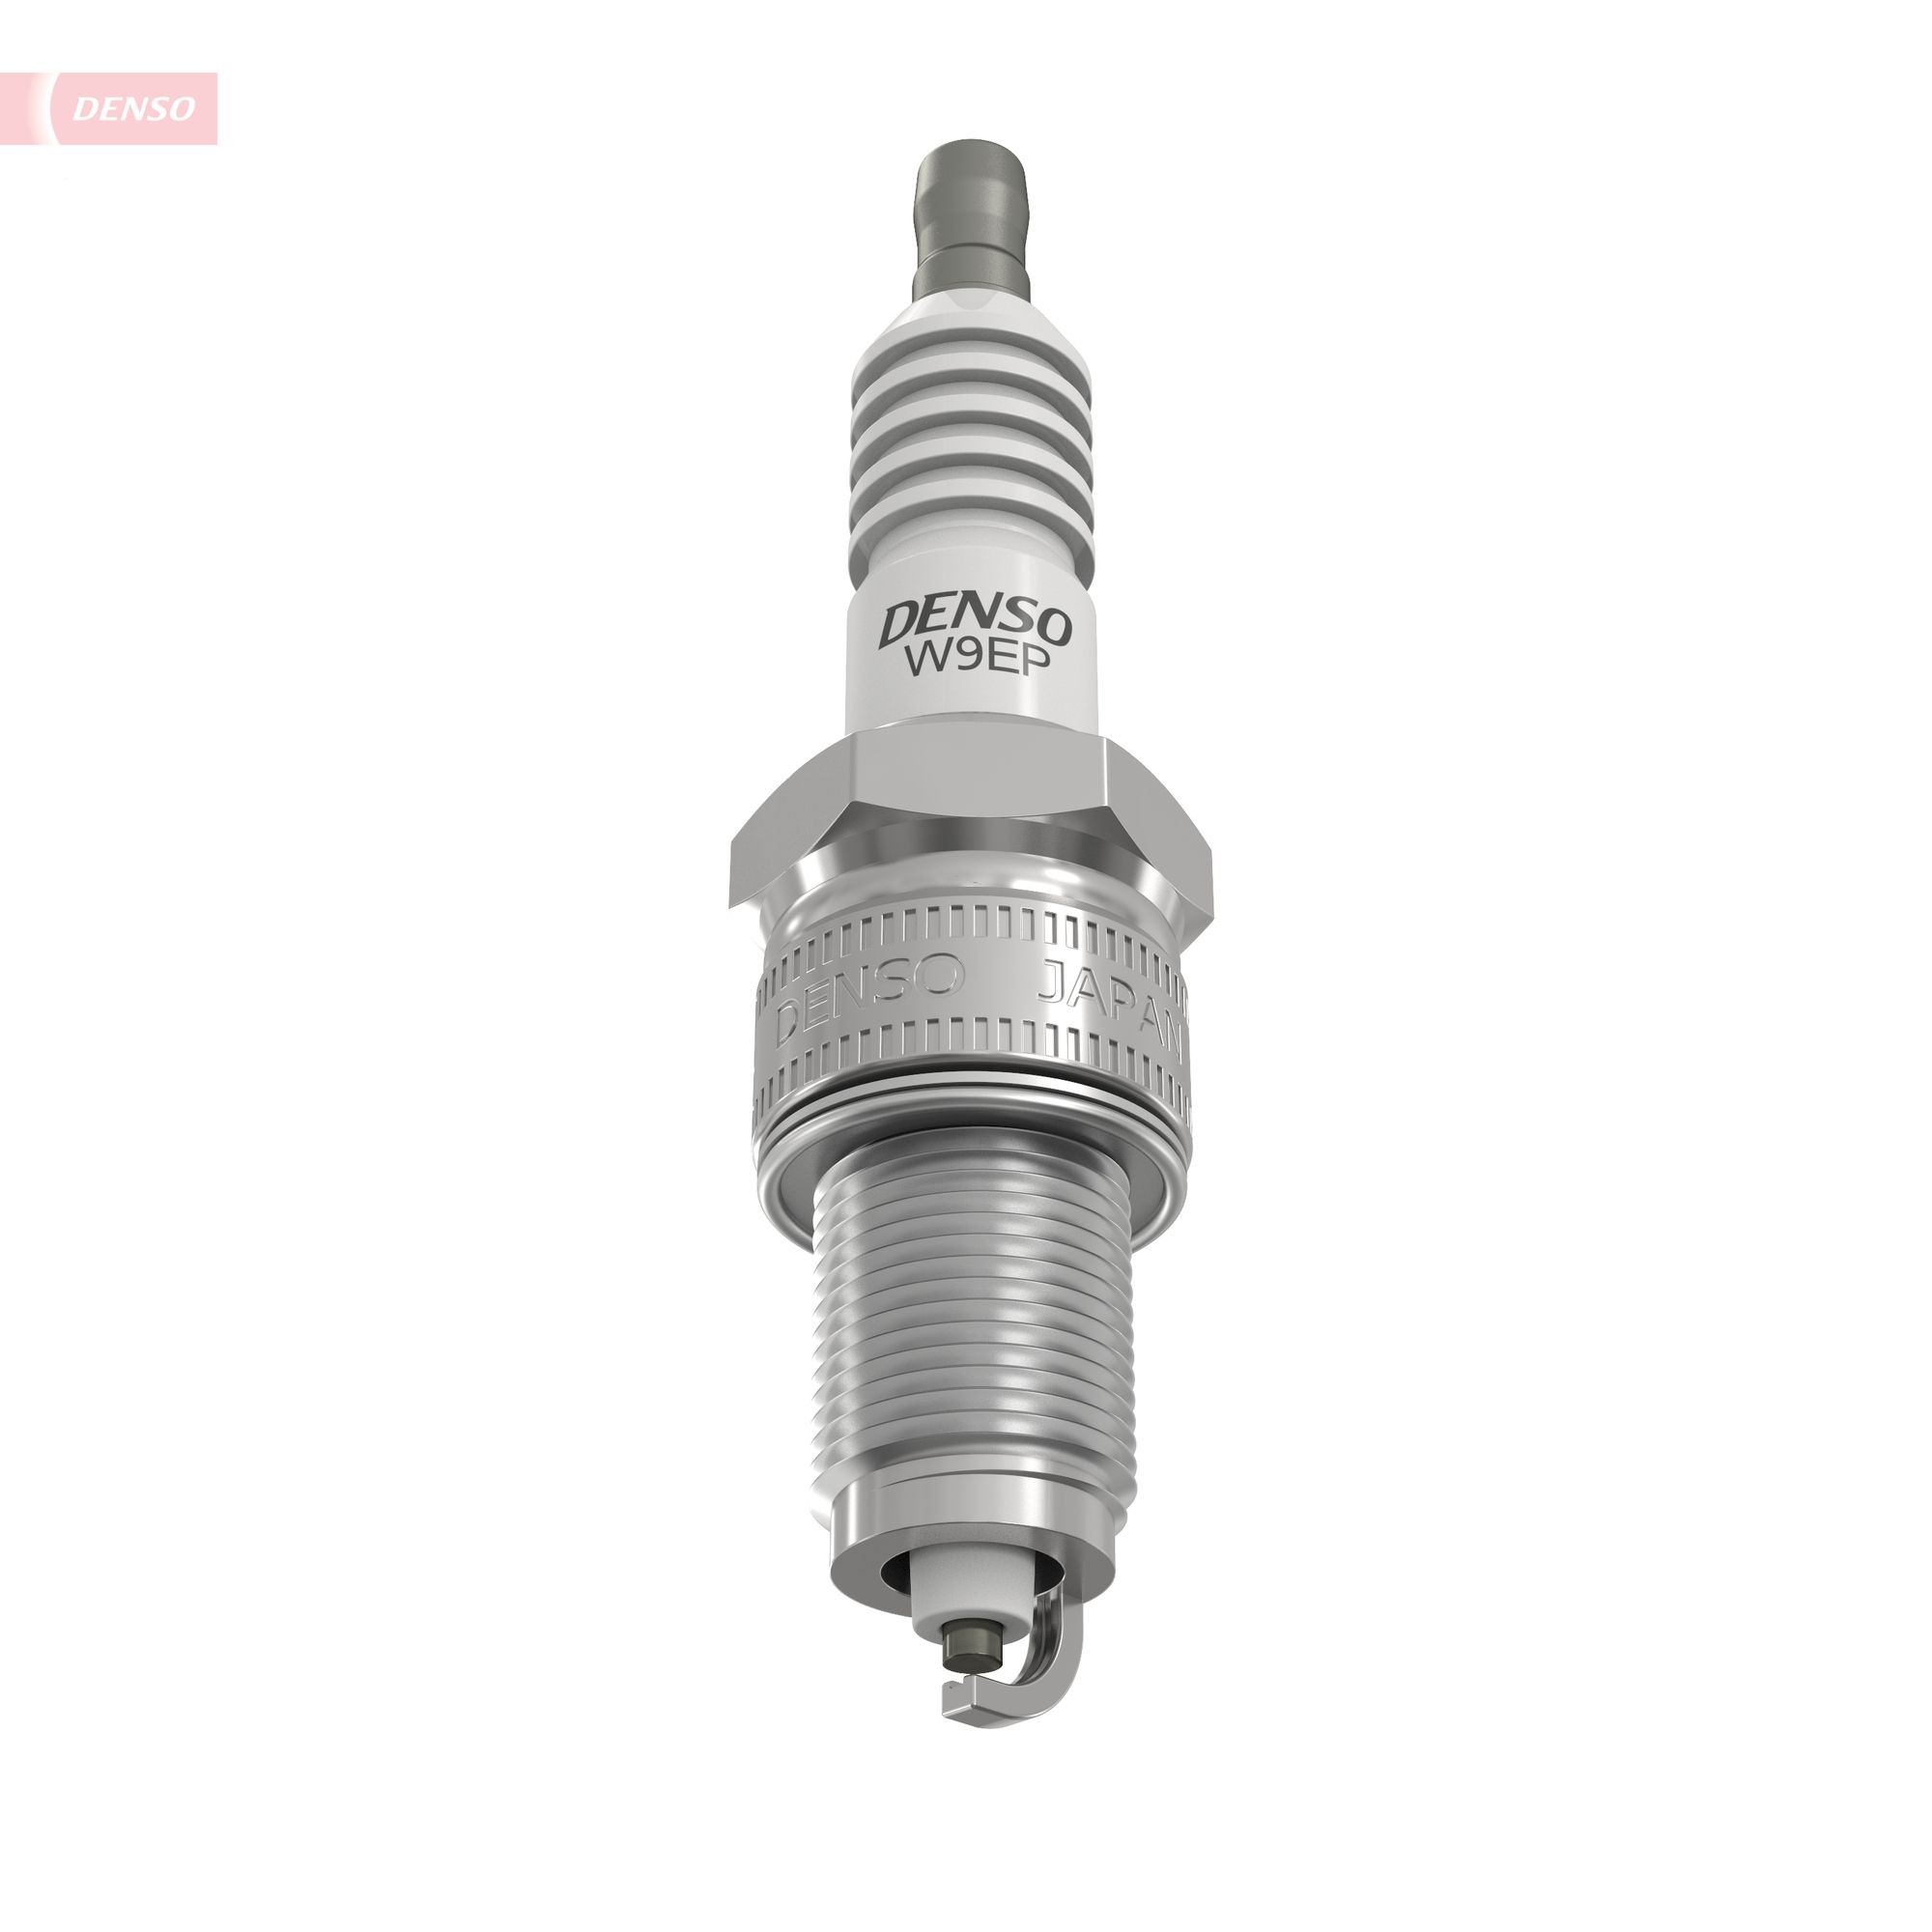 W9EP Spark plug DENSO W9EP review and test